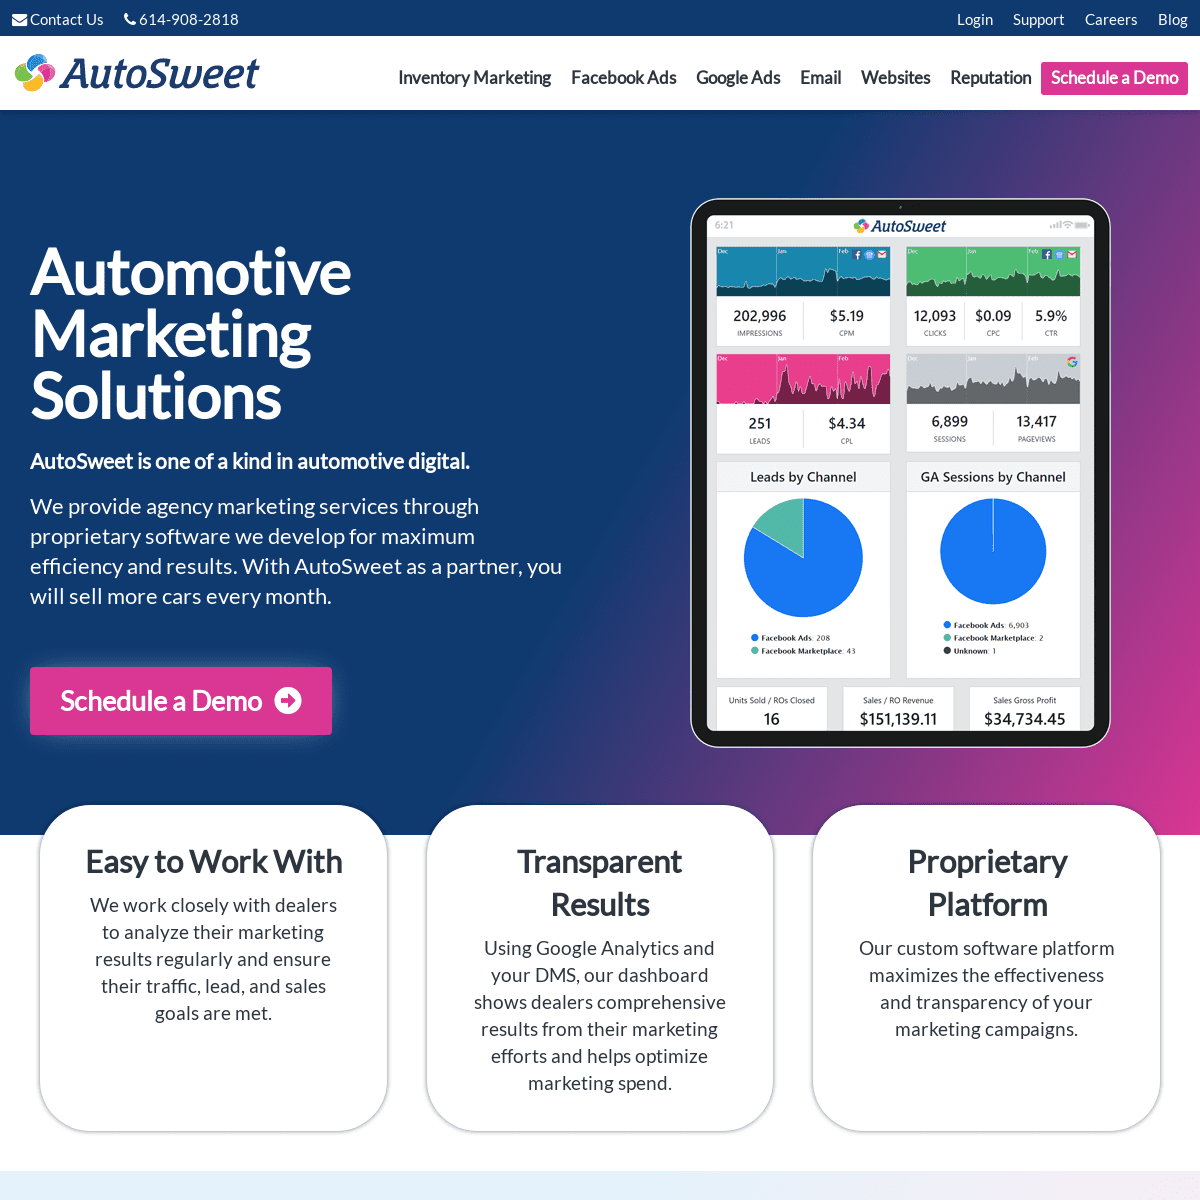 A complete backup of https://autosweet.com